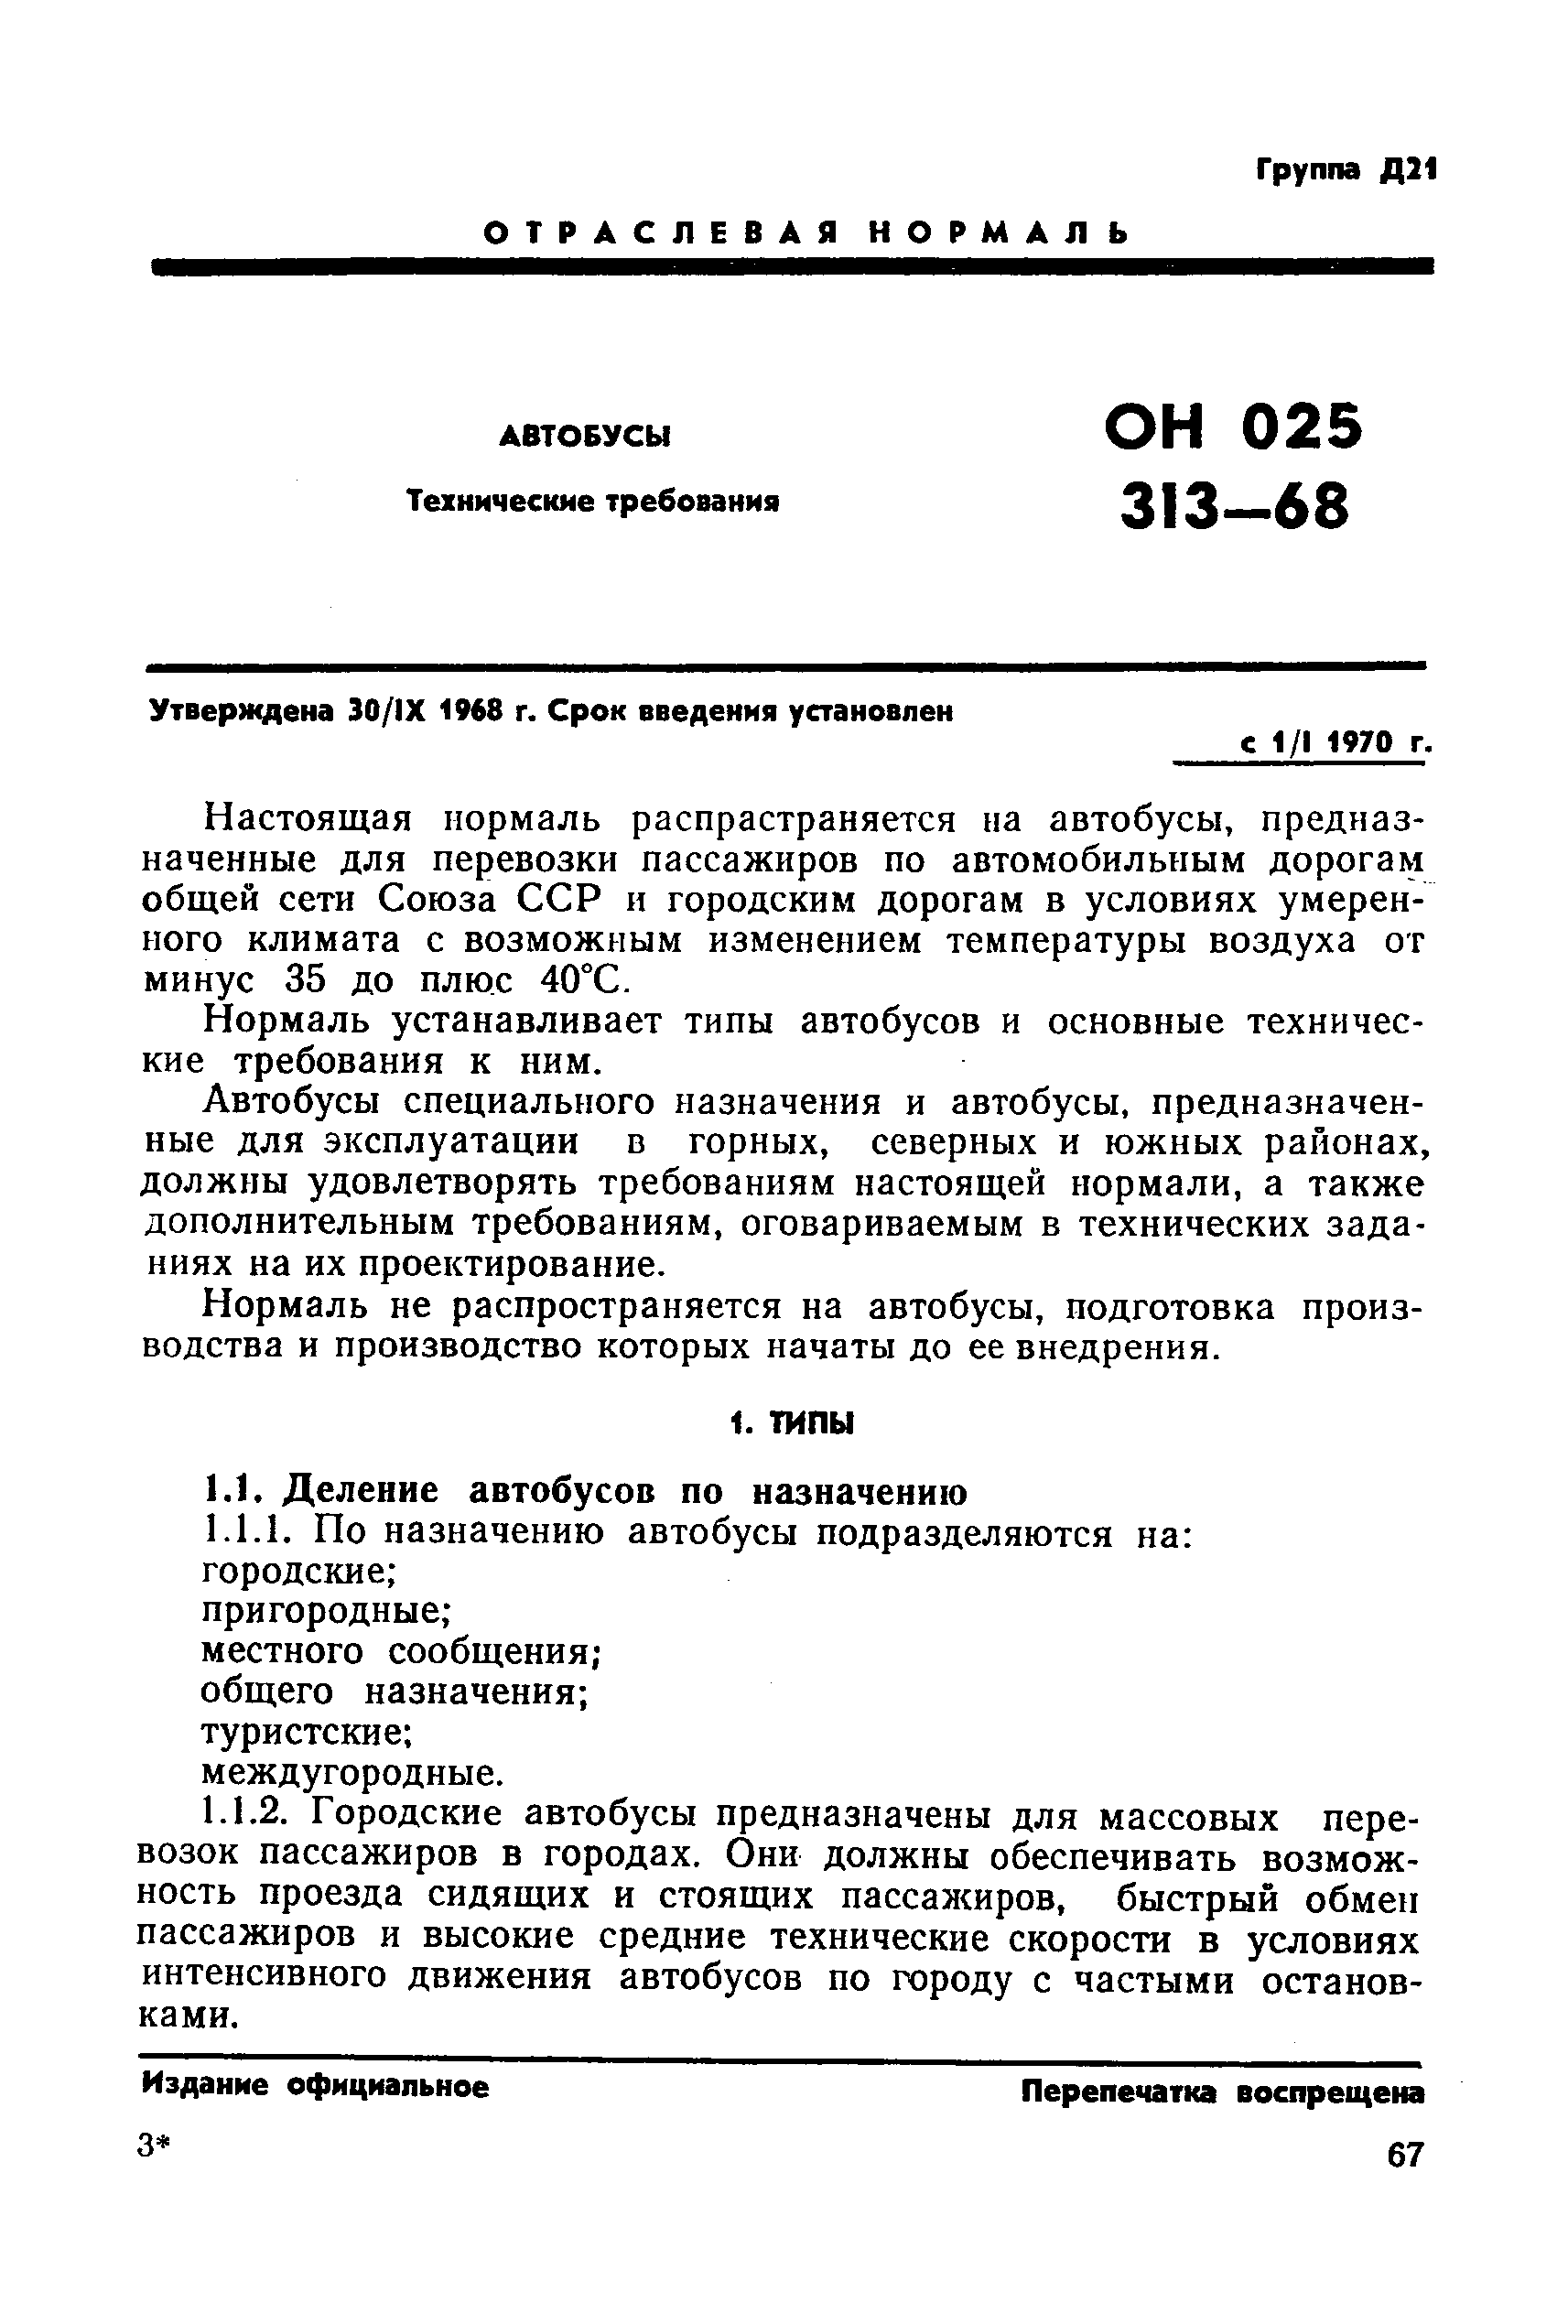 ОН 025 313-68